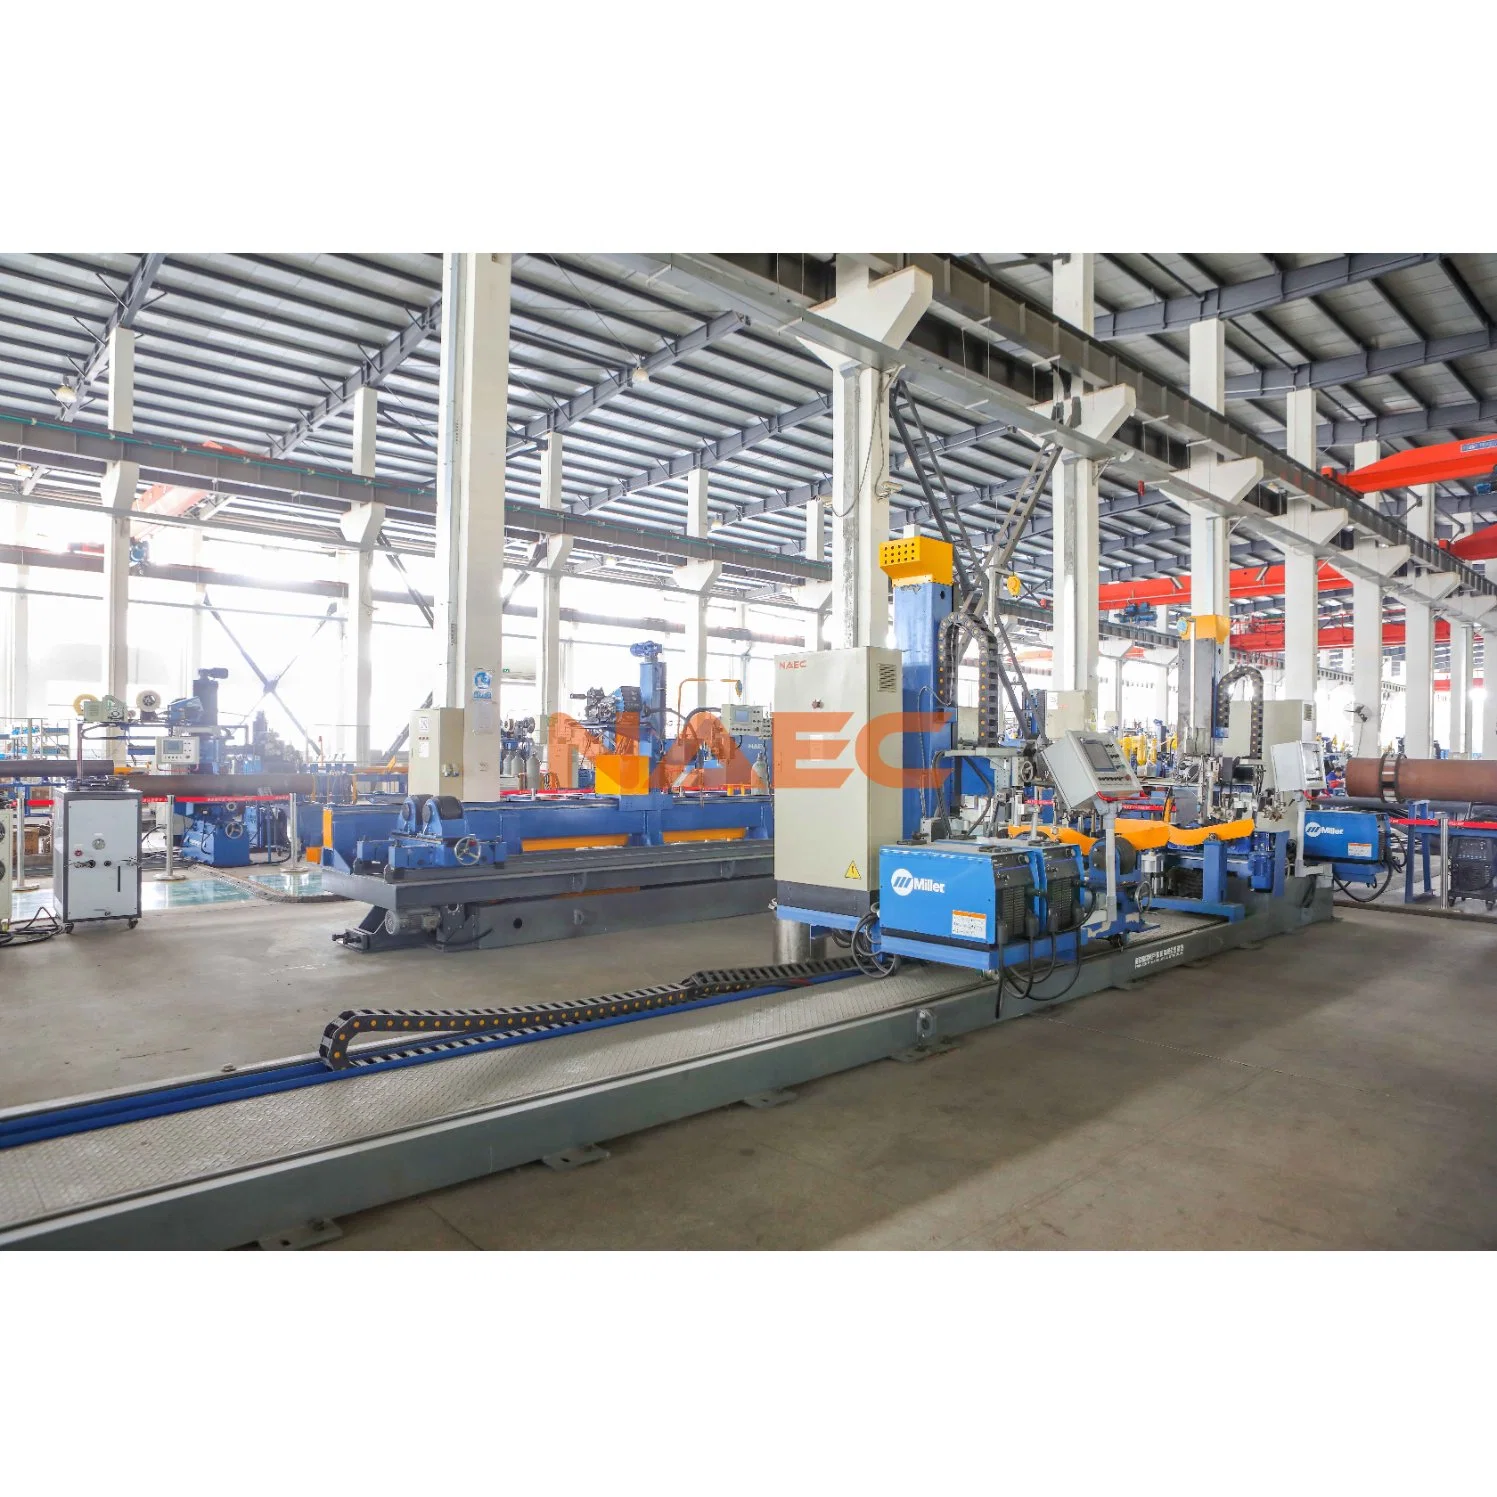 Piping Automatic Fabrication Equipment